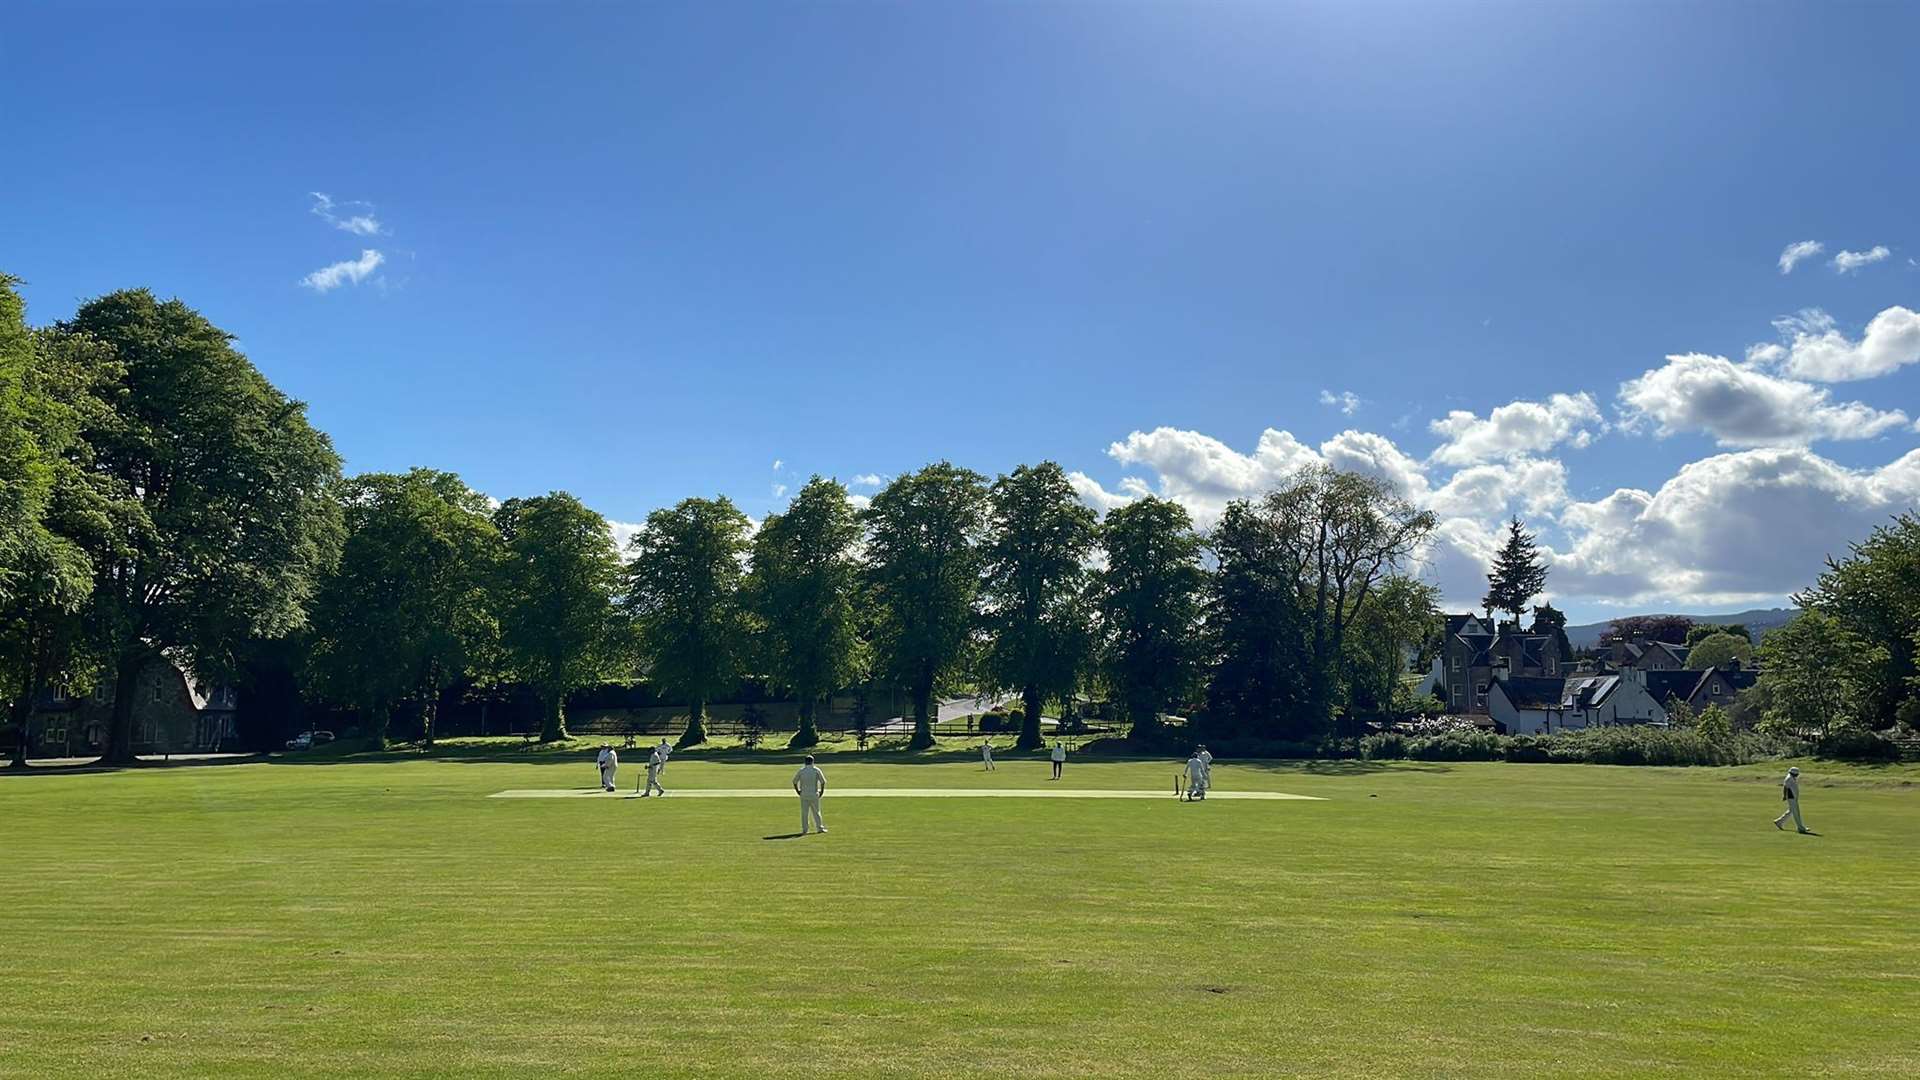 Northern Counties and Fort Augustus believe the Highlands is a welcoming place to play cricket.